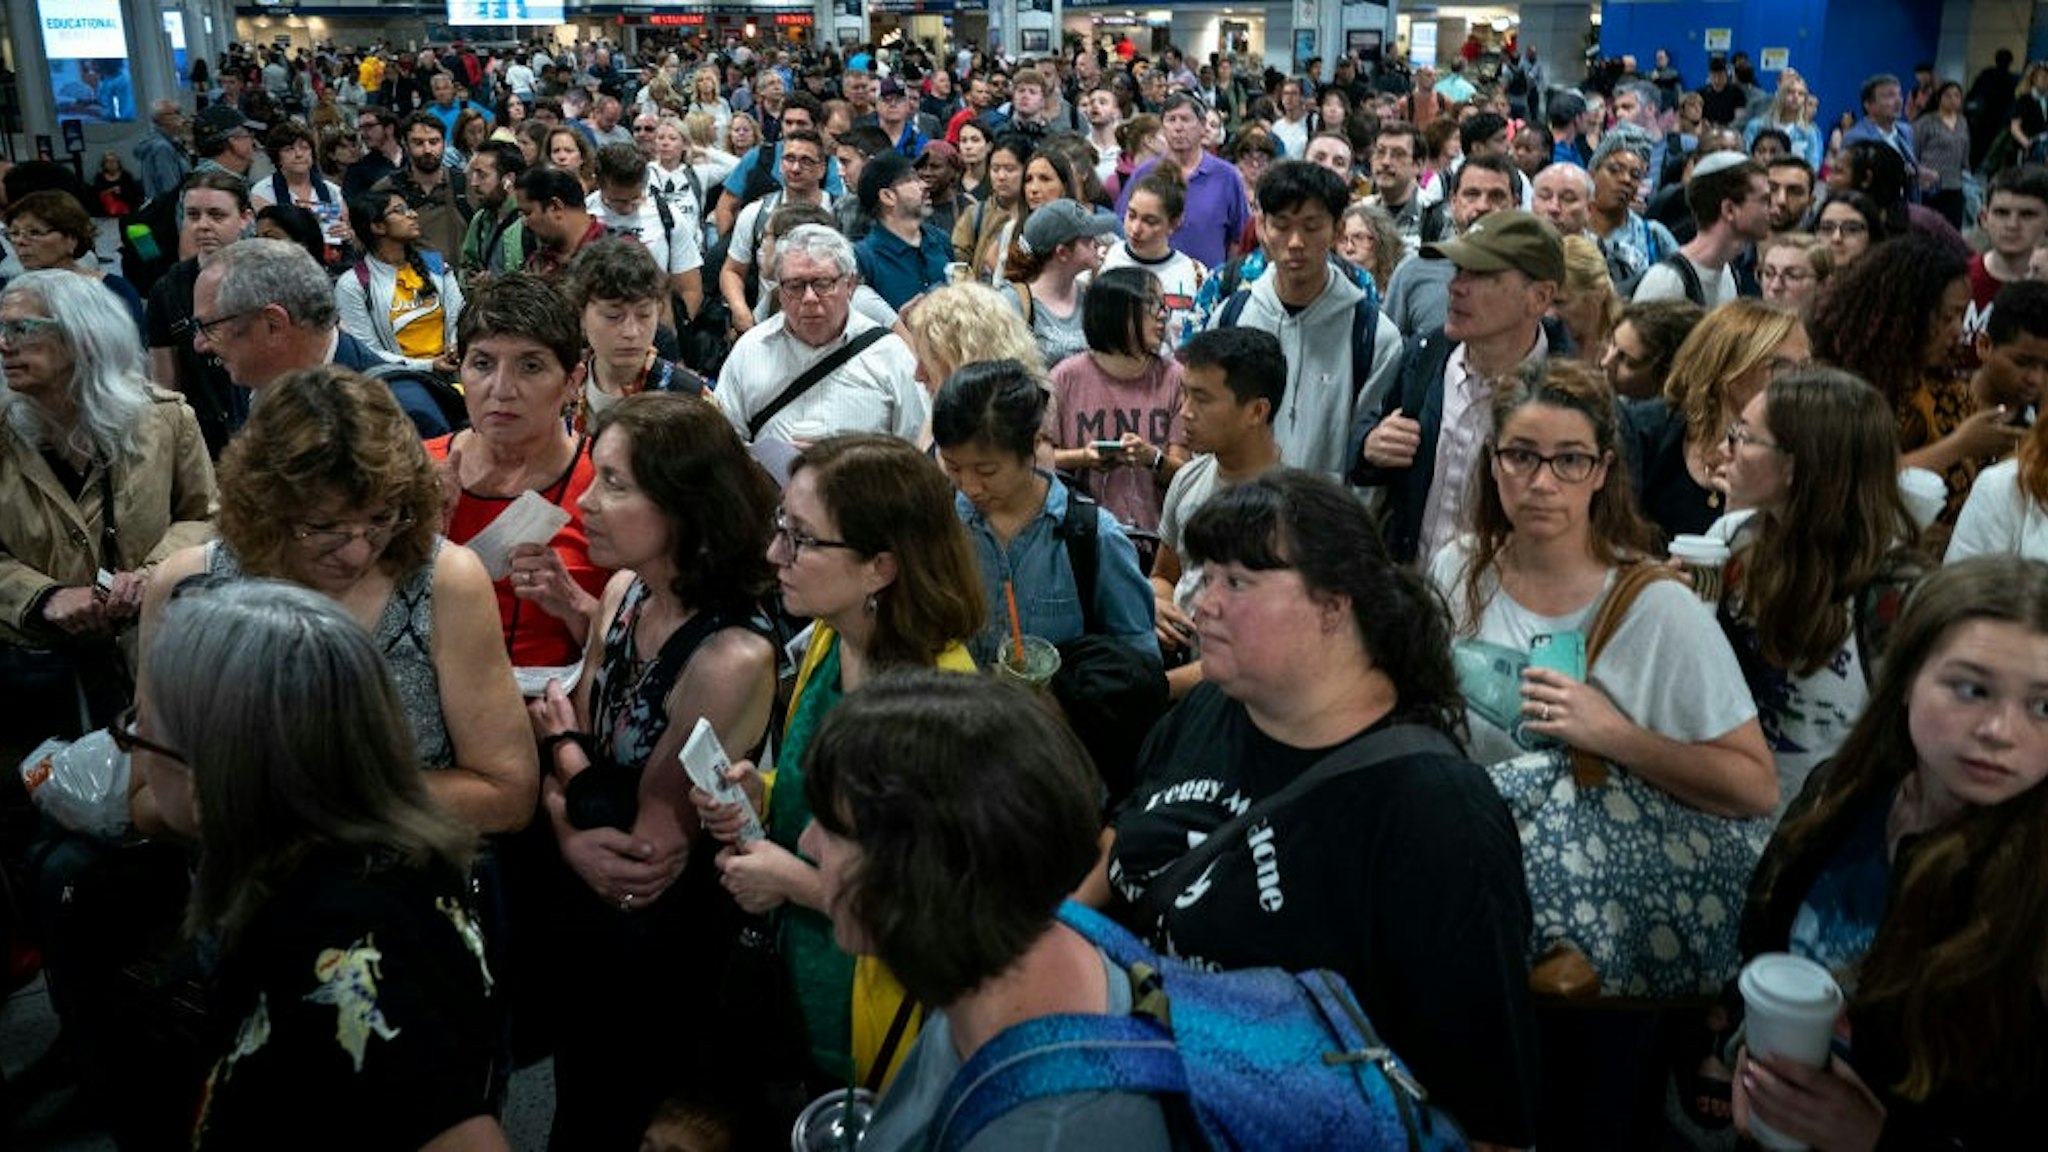 NEW YORK, NY - JUNE 19: Passengers line up to board a delayed Amtrak train at New York Penn Station, June 19, 2019 in New York City. Power outage issues on Amtrak and New Jersey Transit train lines halted all trains in and out of New York Penn Station on Wednesday morning. (Photo by